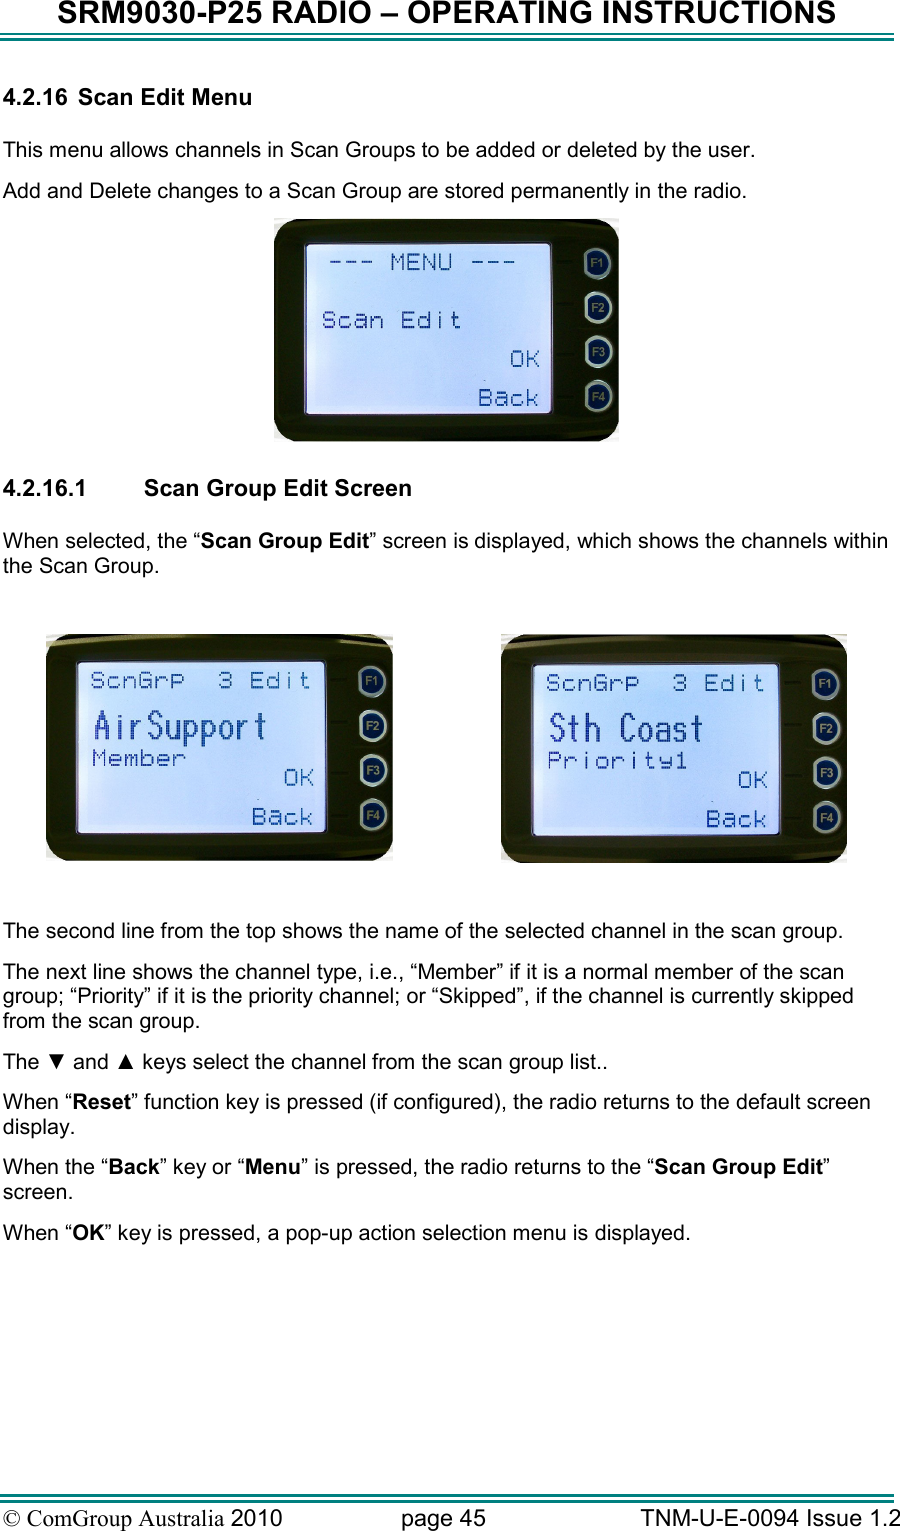 SRM9030-P25 RADIO – OPERATING INSTRUCTIONS © ComGroup Australia 2010  page 45   TNM-U-E-0094 Issue 1.2 4.2.16  Scan Edit Menu  This menu allows channels in Scan Groups to be added or deleted by the user.   Add and Delete changes to a Scan Group are stored permanently in the radio.     4.2.16.1  Scan Group Edit Screen  When selected, the “Scan Group Edit” screen is displayed, which shows the channels within the Scan Group.       The second line from the top shows the name of the selected channel in the scan group.   The next line shows the channel type, i.e., “Member” if it is a normal member of the scan group; “Priority” if it is the priority channel; or “Skipped”, if the channel is currently skipped from the scan group.  The ▼ and ▲ keys select the channel from the scan group list.. When “Reset” function key is pressed (if configured), the radio returns to the default screen display. When the “Back” key or “Menu” is pressed, the radio returns to the “Scan Group Edit” screen. When “OK” key is pressed, a pop-up action selection menu is displayed. 